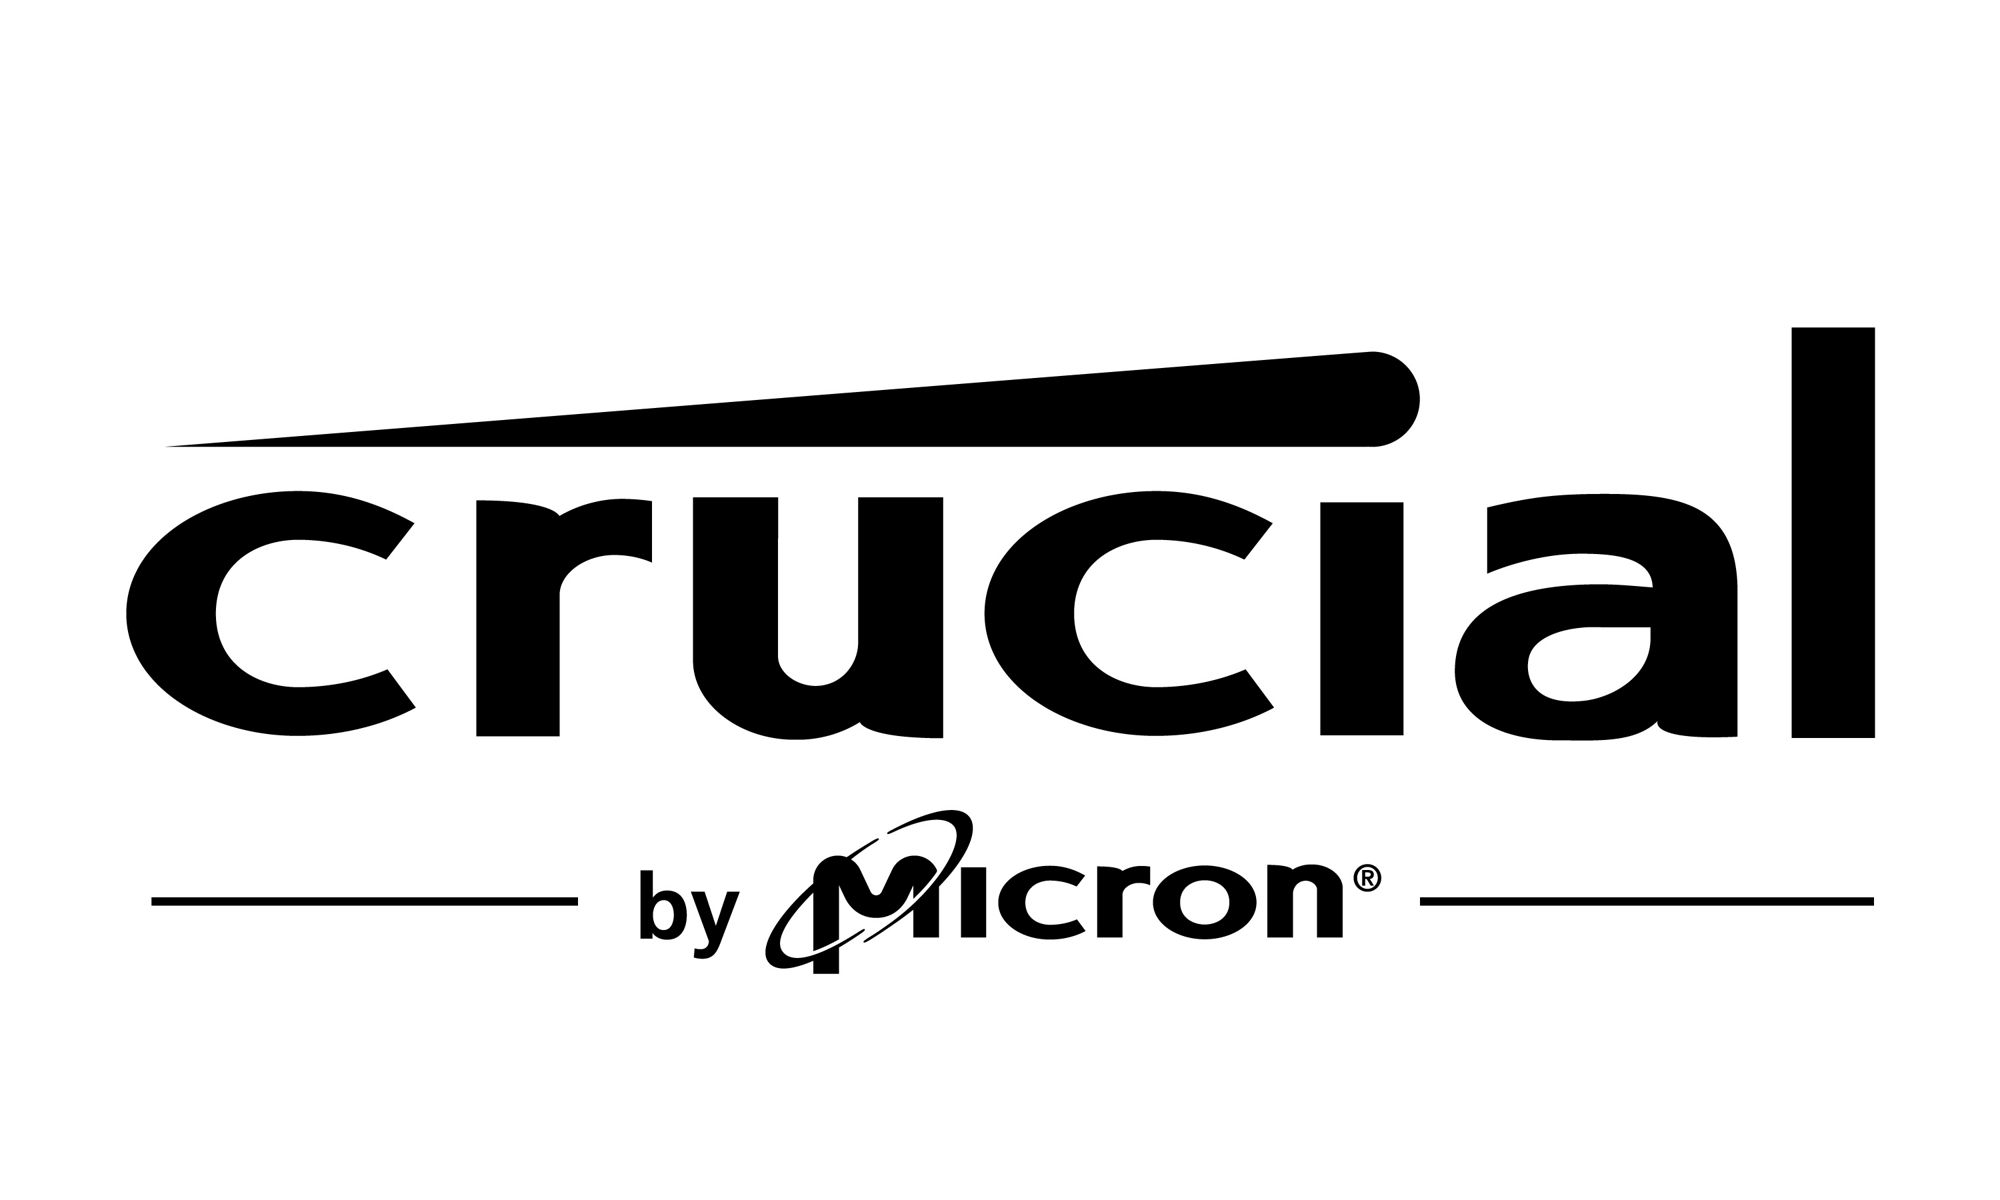 Crucial by Micron 標誌